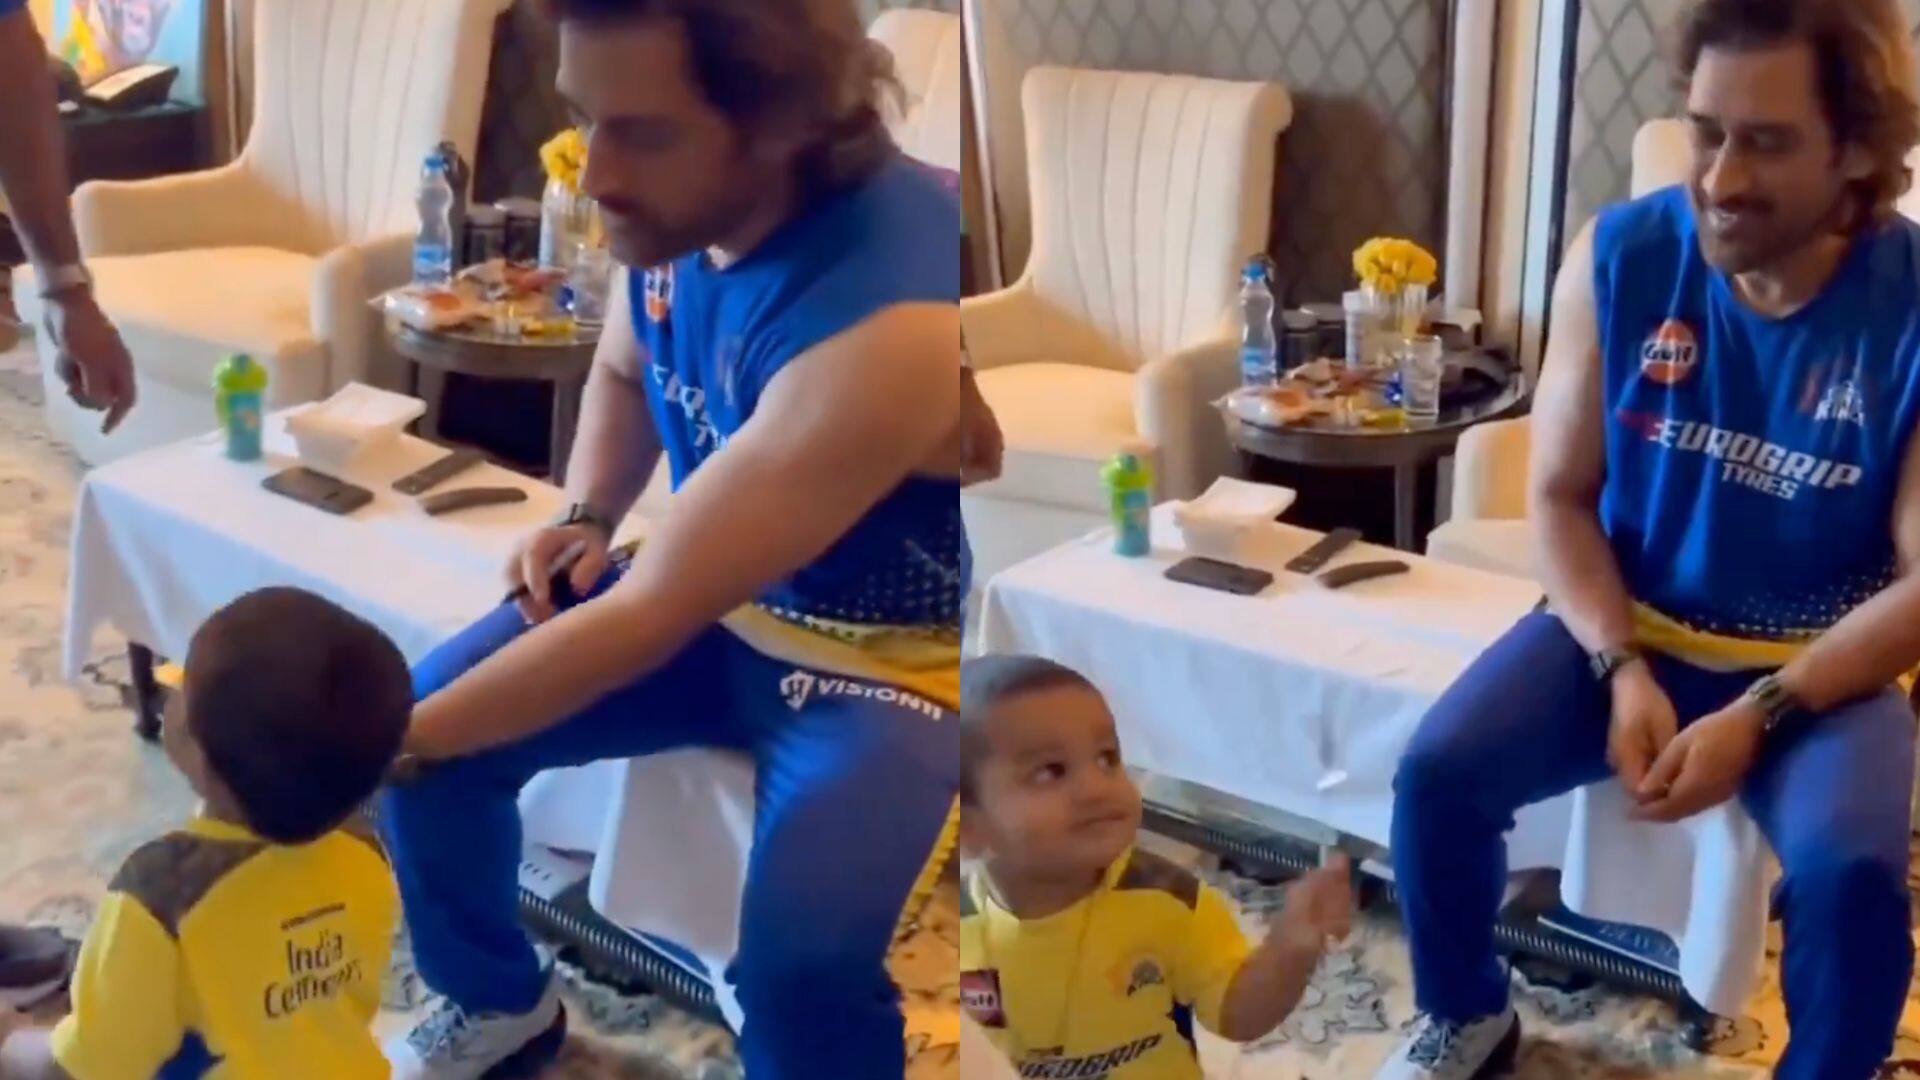 Dhoni's cute interaction with the kid [X.com]